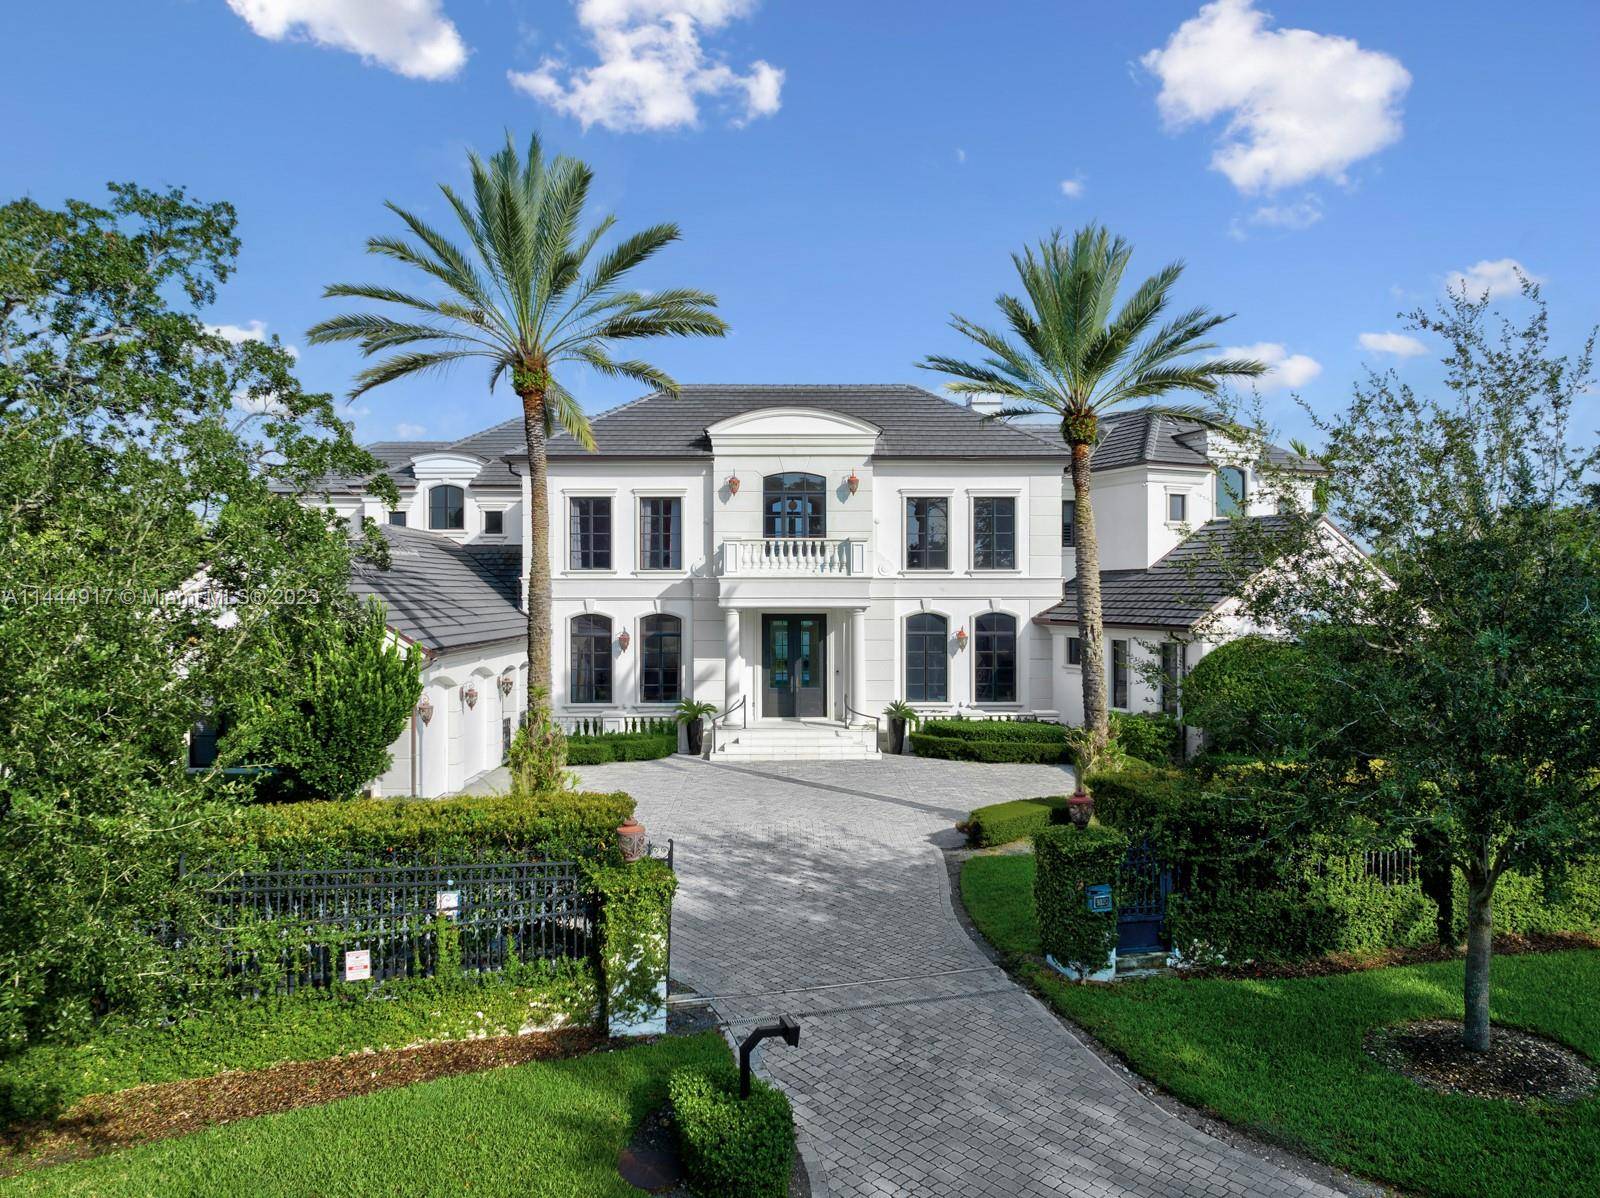 In the highly coveted gated Coral Gables community of Old Cutler Bay, this stunning residence was designed by famed architect Ramon Pacheco remodeled in 2015 offering modern luxury living.